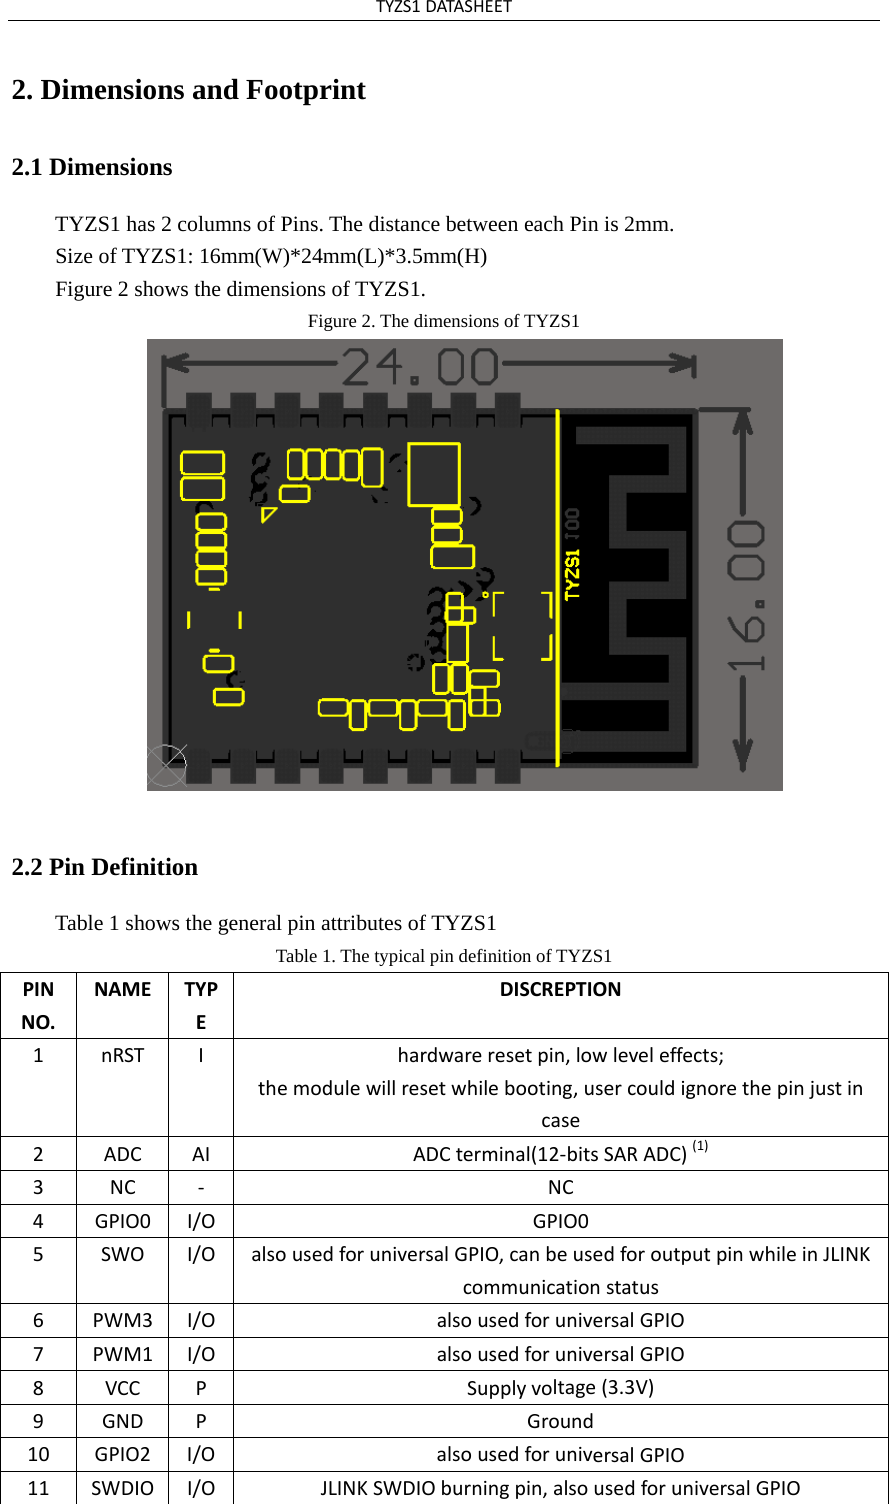 TYZS1DATASHEET2. Dimensions and Footprint2.1 Dimensions TYZS1 has 2 columns of Pins. The distance between each Pin is 2mm. Size of TYZS1: 16mm(W)*24mm(L)*3.5mm(H) Figure 2 shows the dimensions of TYZS1. Figure 2. The dimensions of TYZS1 2.2 Pin Definition Table 1 shows the general pin attributes of TYZS1 Table 1. The typical pin definition of TYZS1 PINNO.NAMETYPEDISCREPTION1nRSTIhardwareresetpin,lowleveleffects;themodulewillresetwhilebooting,usercouldignorethepinjustincase2ADCAIADCterminal(12‐bitsSARADC)(1)3NC‐ NC4GPIO0I/OGPIO05SWOI/OalsousedforuniversalGPIO,canbeusedforoutputpinwhileinJLINKcommunicationstatus6PWM3I/OalsousedforuniversalGPIO7PWM1I/OalsousedforuniversalGPIO8VCCPSupplyvoltage(3.3V)9GNDPGround10GPIO2I/OalsousedforuniversalGPIO11SWDIOI/OJLINKSWDIOburningpin,alsousedforuniversalGPIO